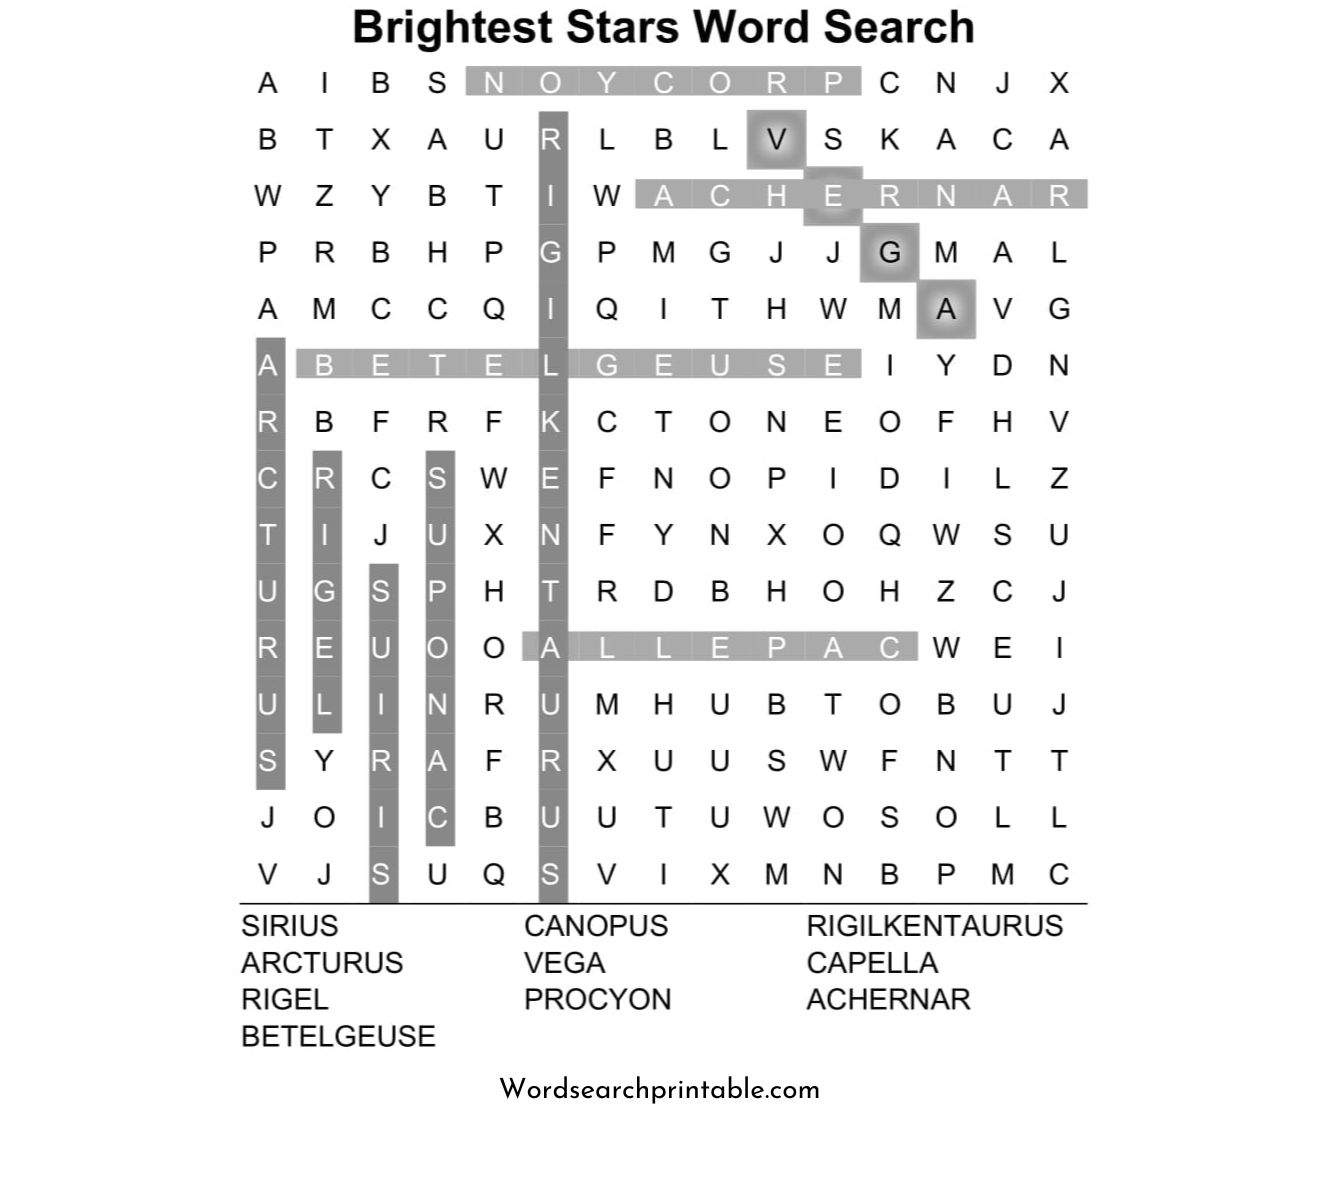 brightest stars word search puzzle solution